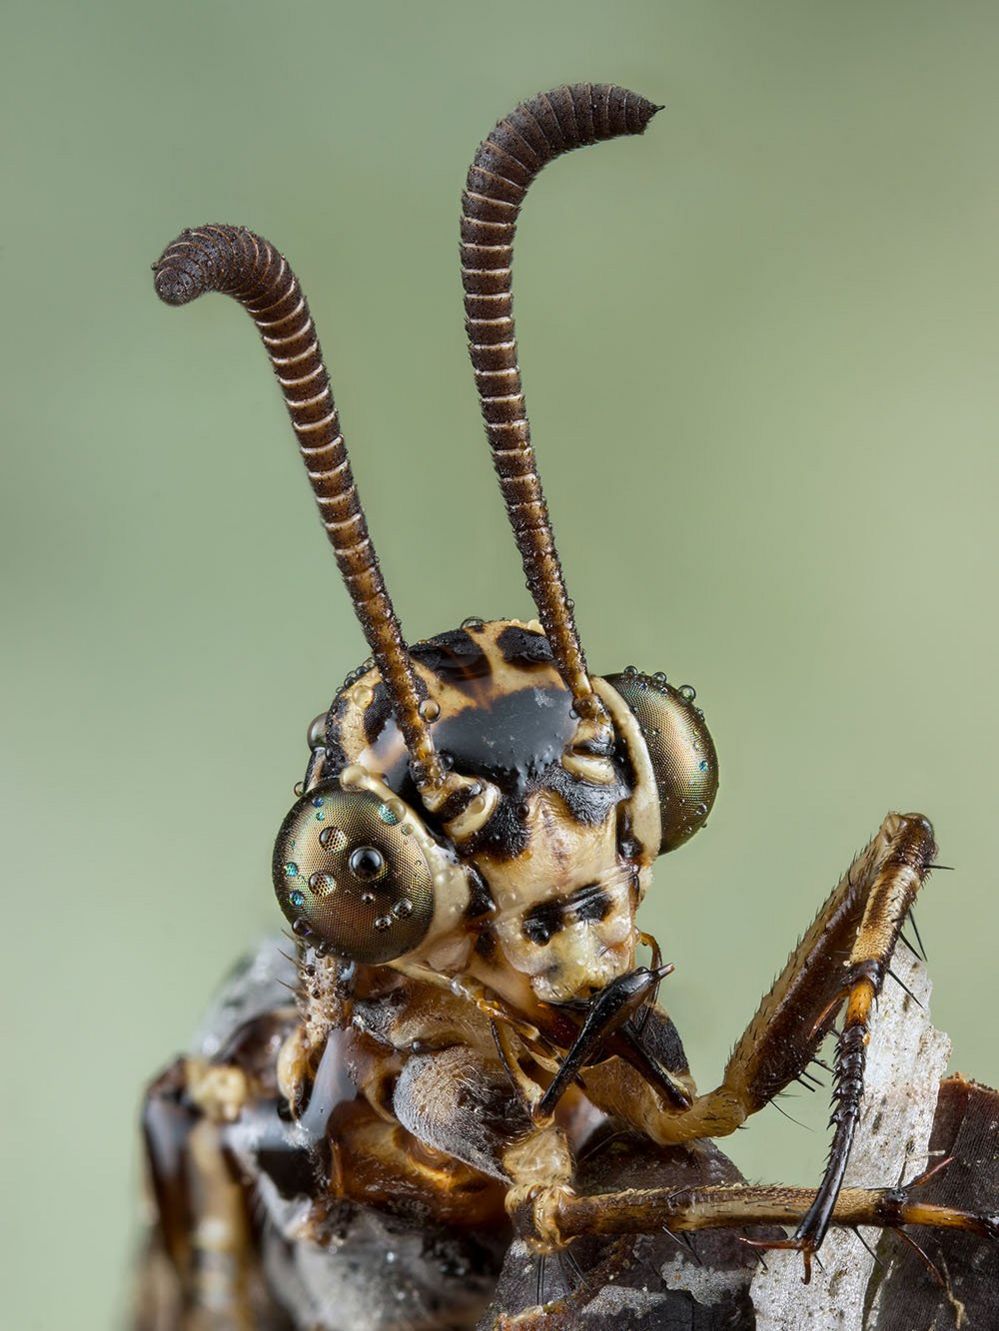 An ant lion